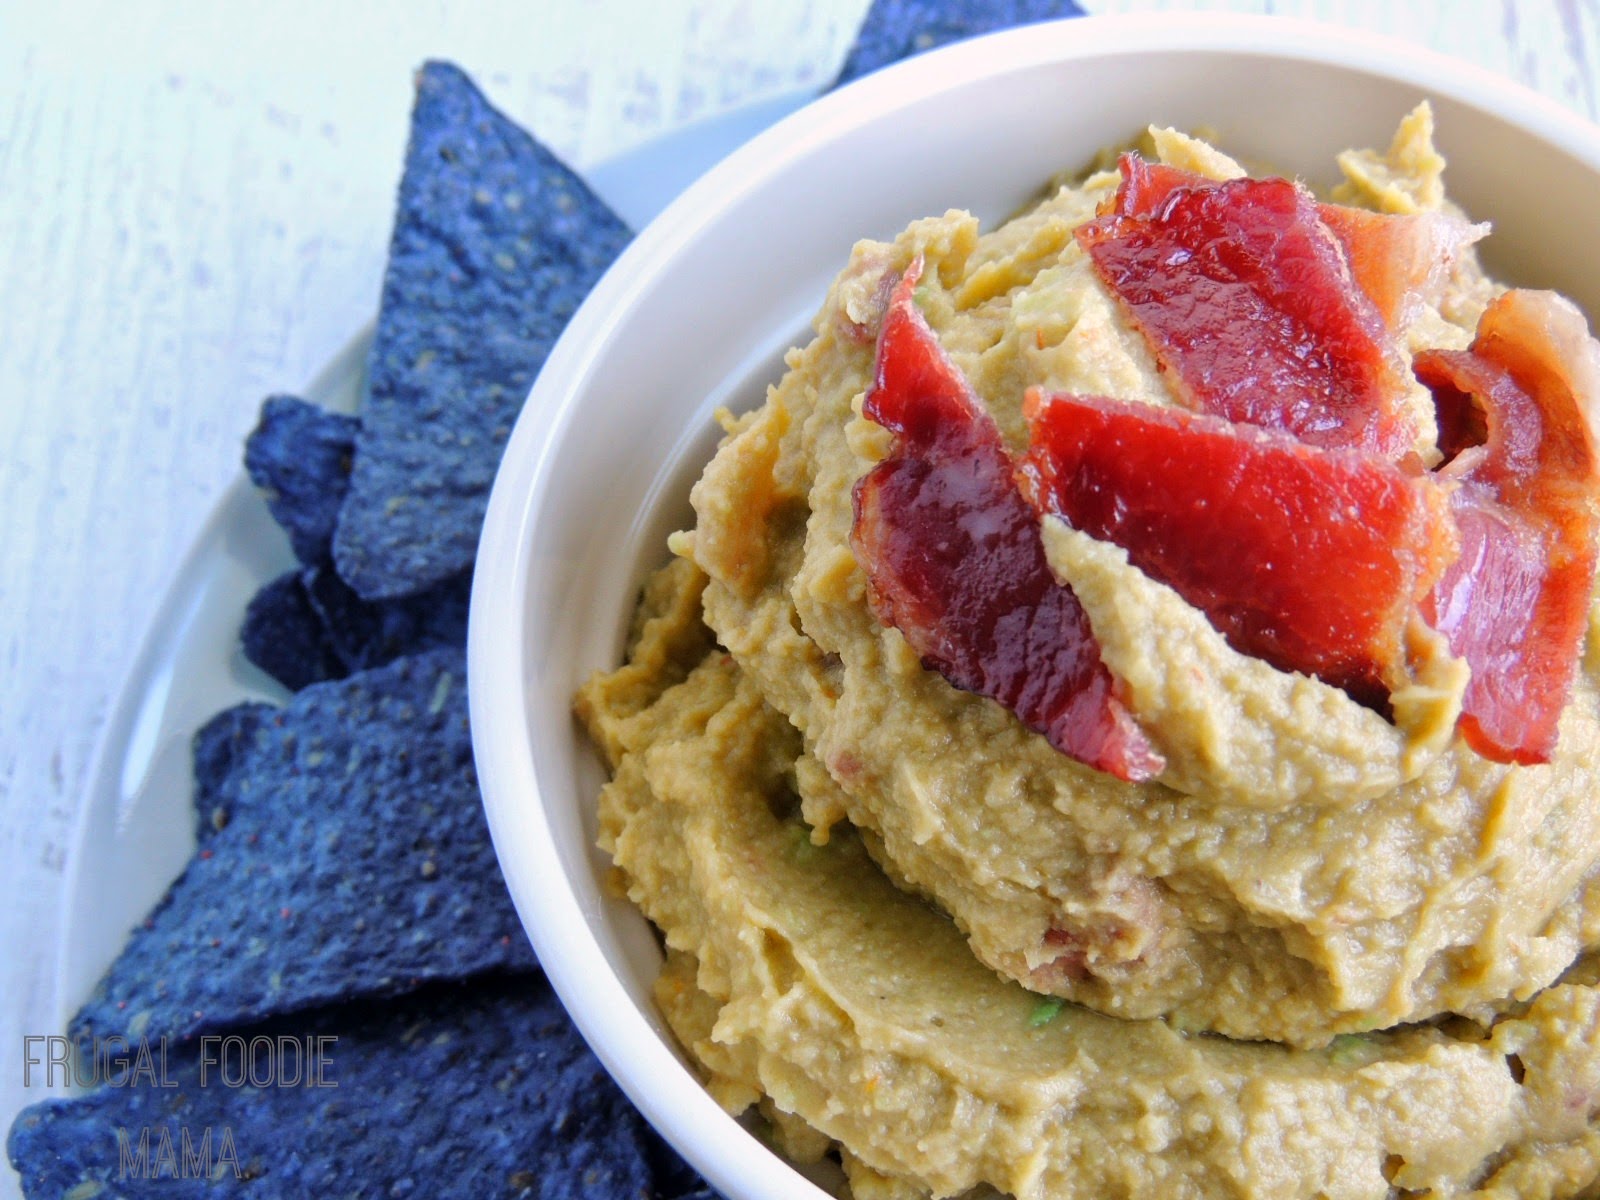 How can you make your three favorite chip dips even better? Combine them together and then throw some bacon in there, like in this Bacon Guaca-Hummus.